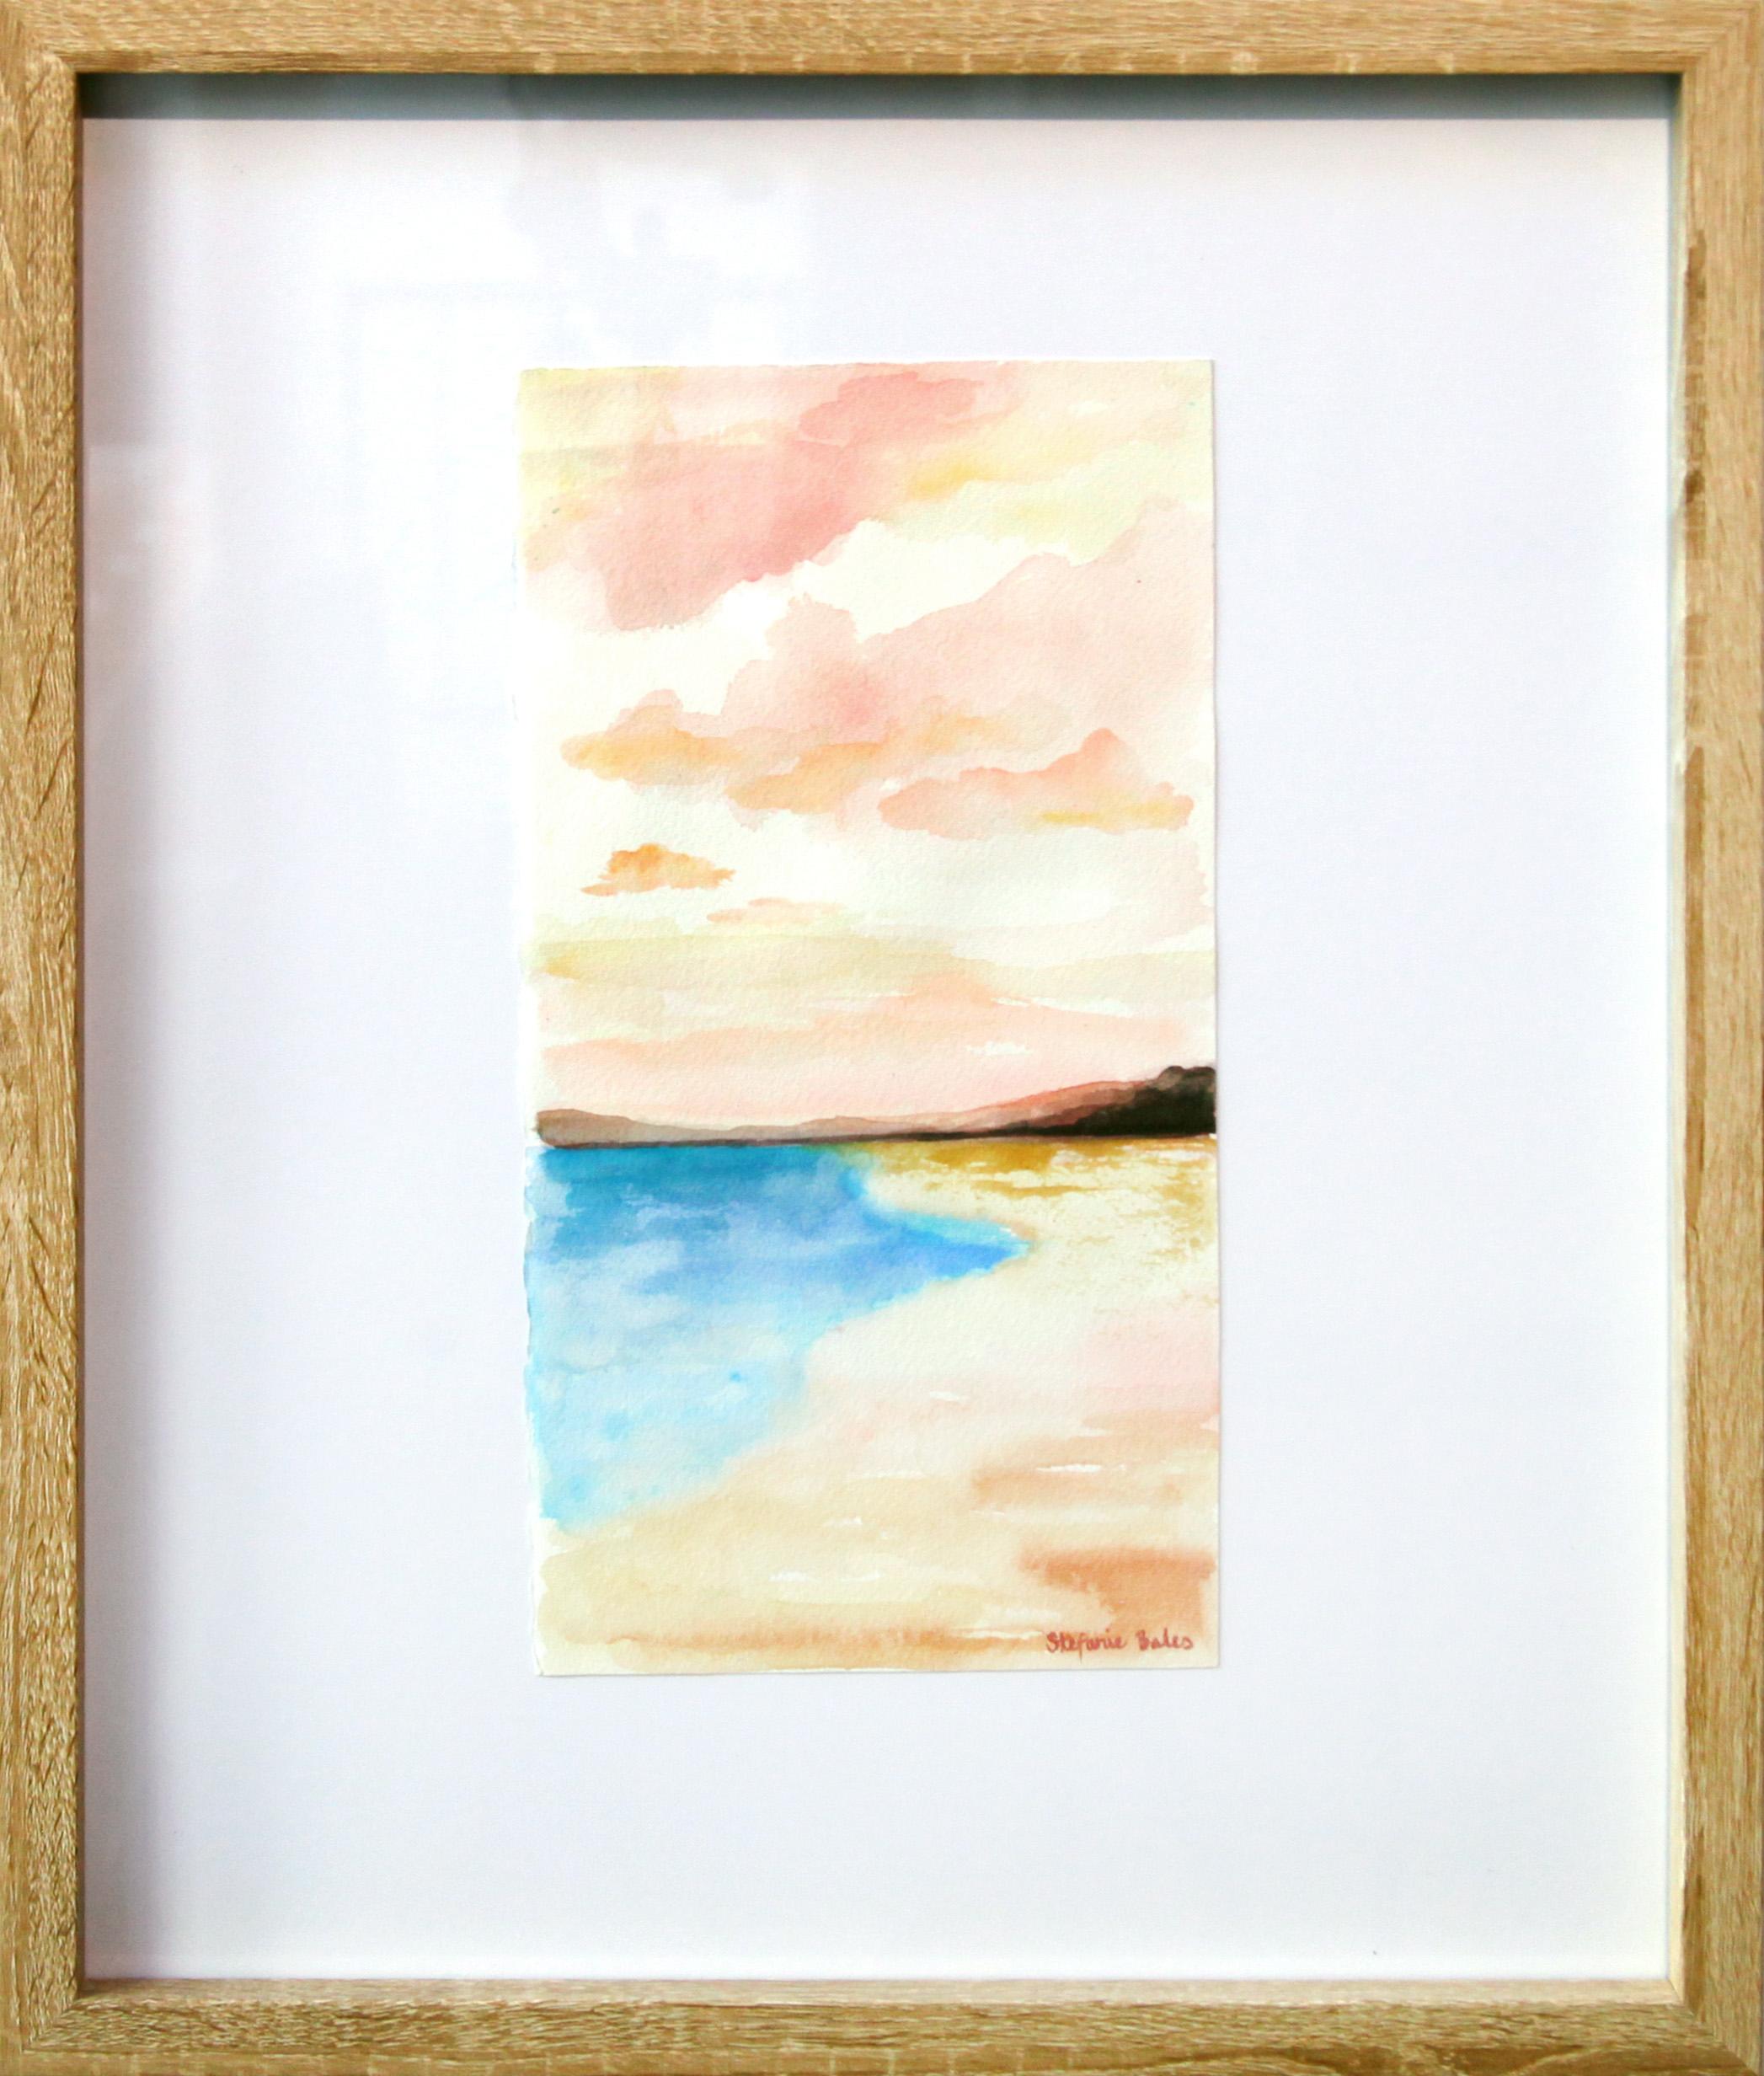 A one of a kind 17.5x20.5 Abstract Impressionist Watercolor on Paper Landscape Painting executed by artist Stefanie Bales. A certificate of authenticity will be provided upon its purchase or delivery.

All of Stefanie Bales’ work reflects on the